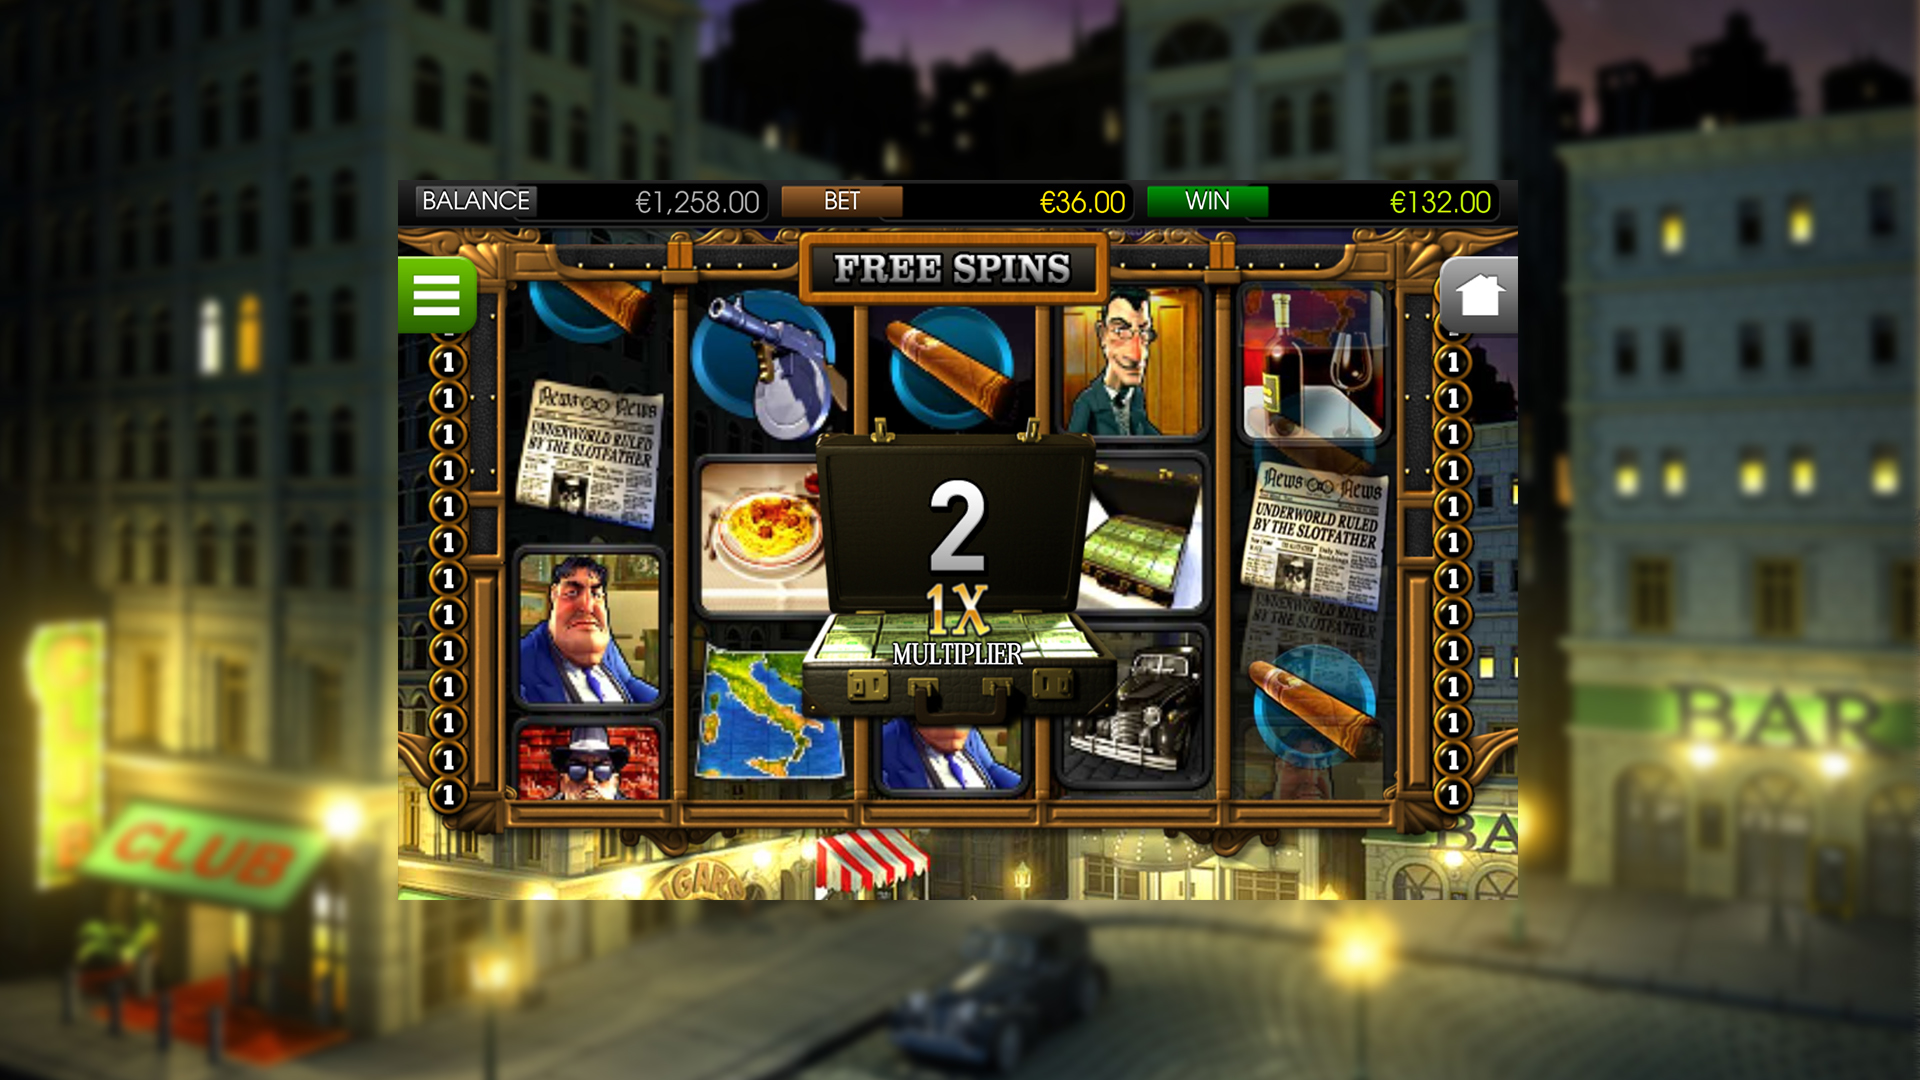 The Slotfather - Free Spins